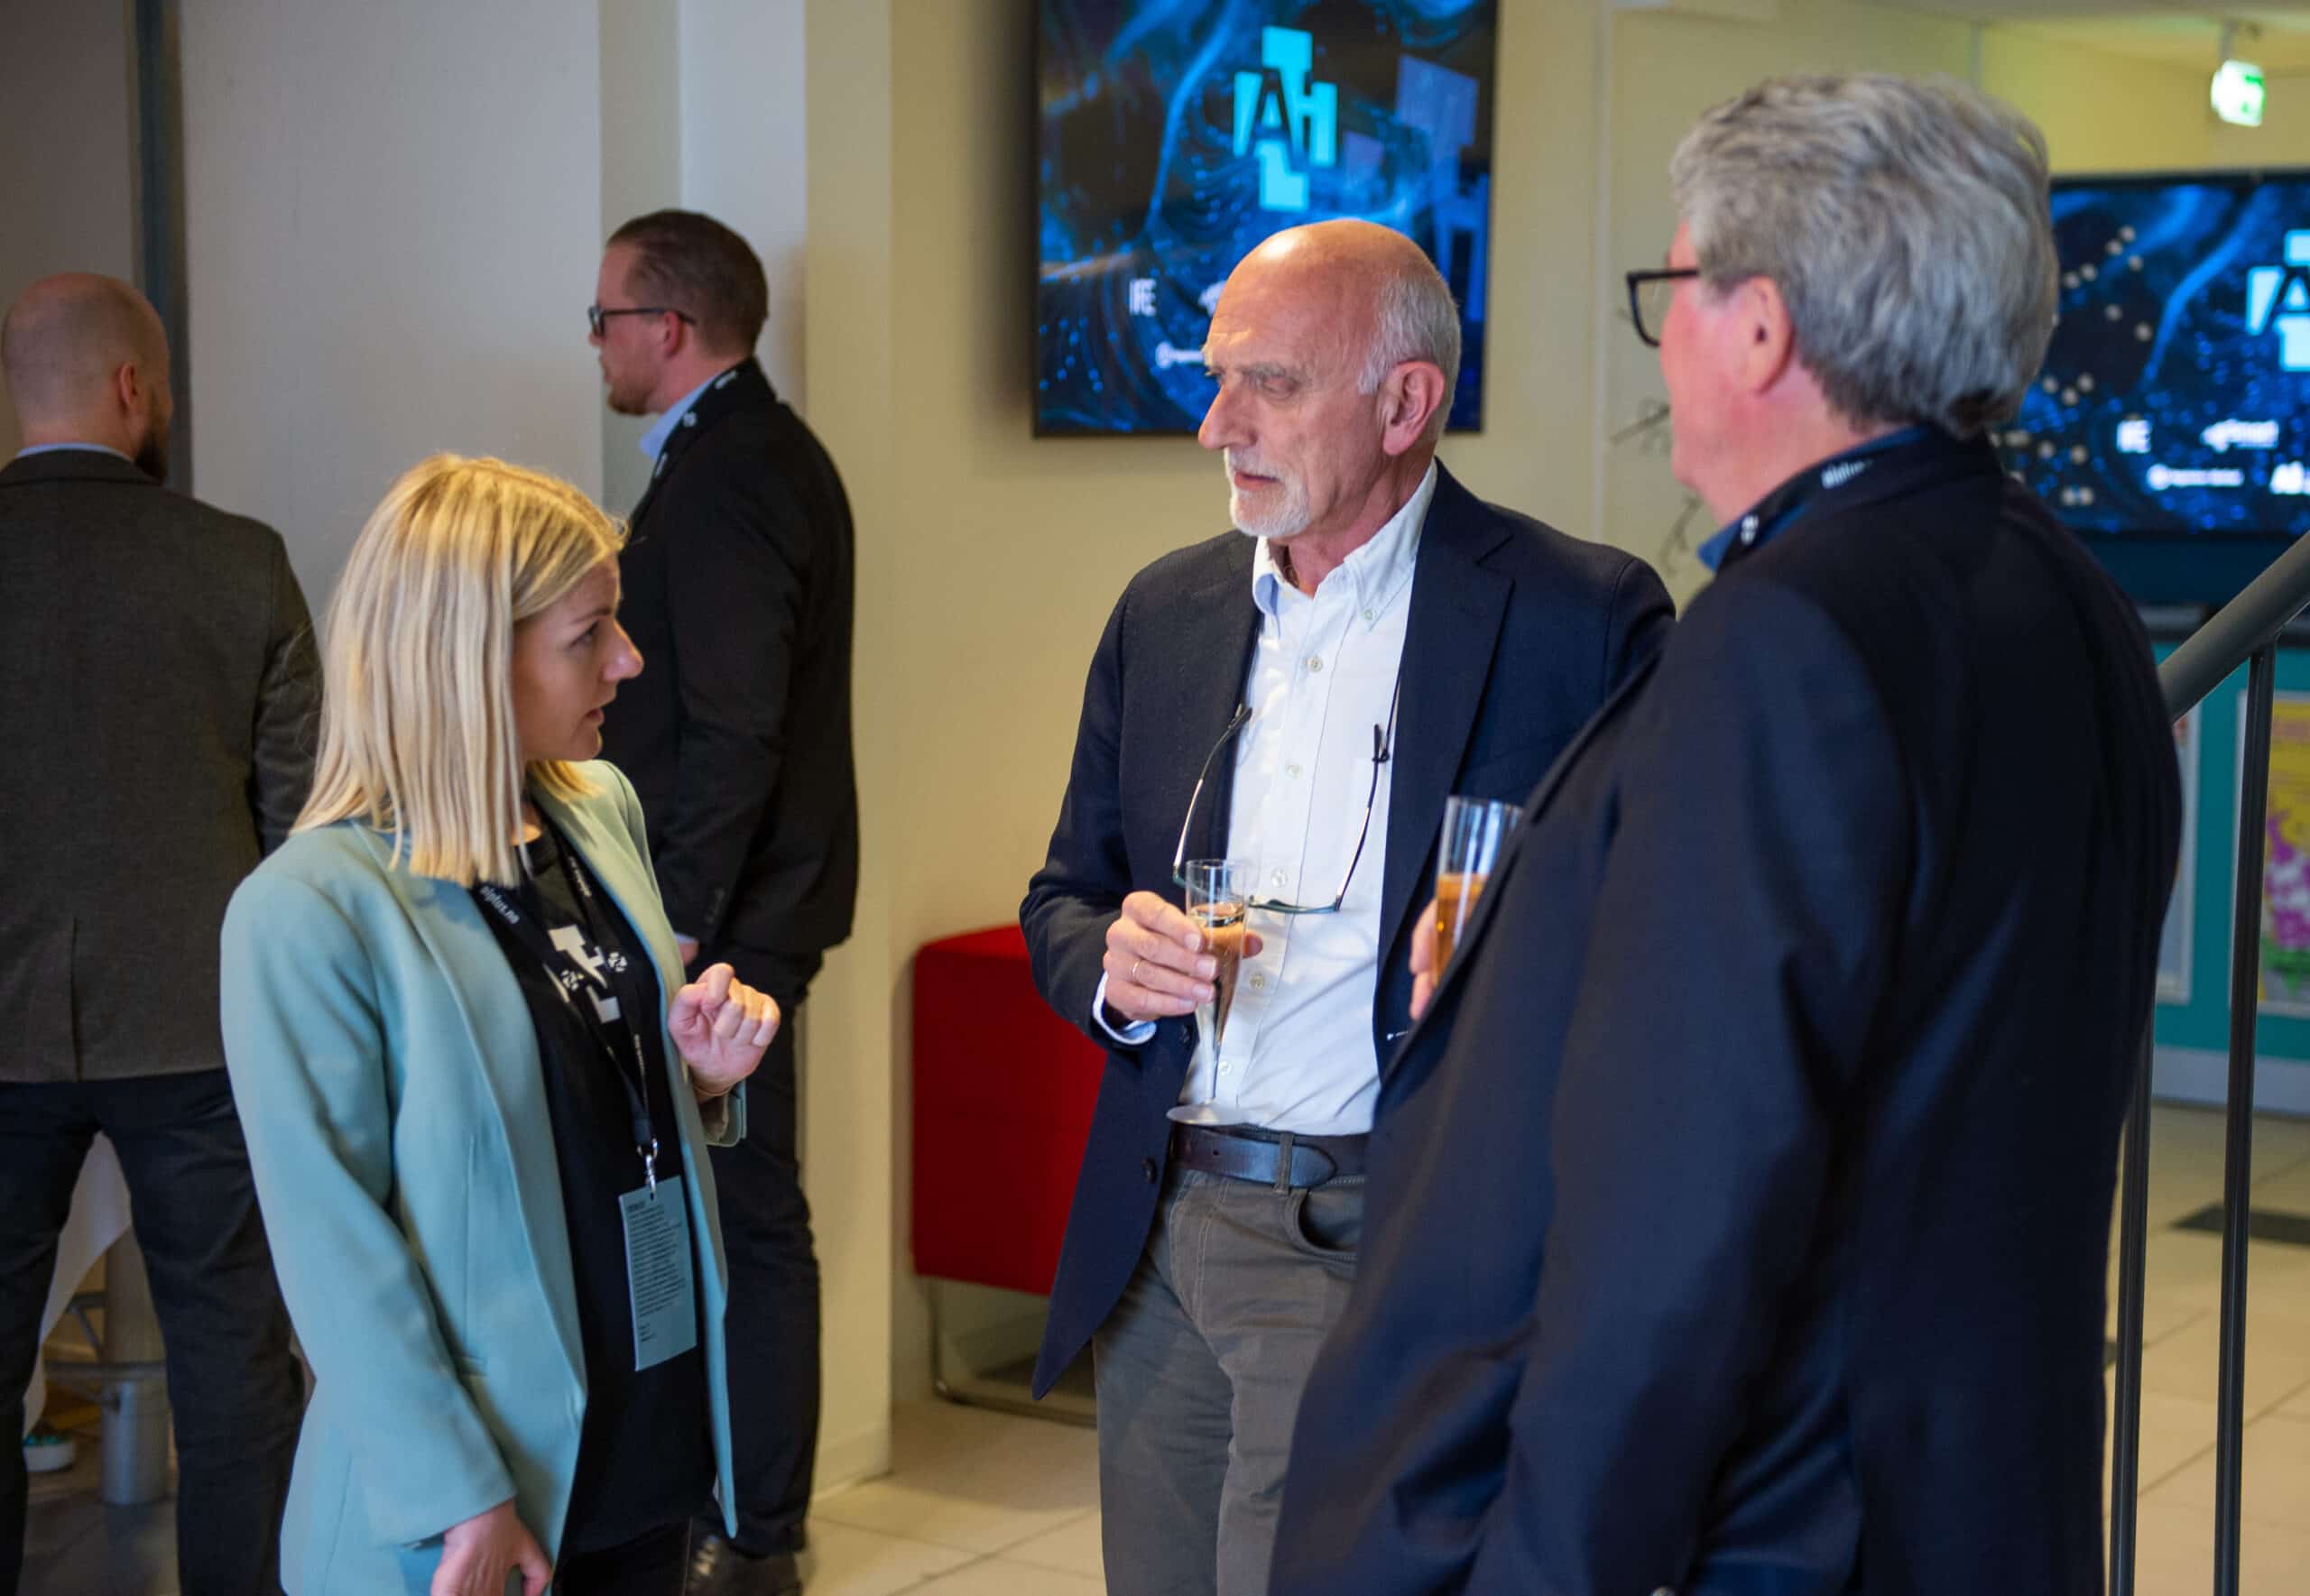 Project manager for AI+, Mari Kristine Buckholm, talking to the chair of Smart Innovation Norway's board, Ole Andreas Schärer. PHOTO: Stein Johnsen, Contentvideo.no